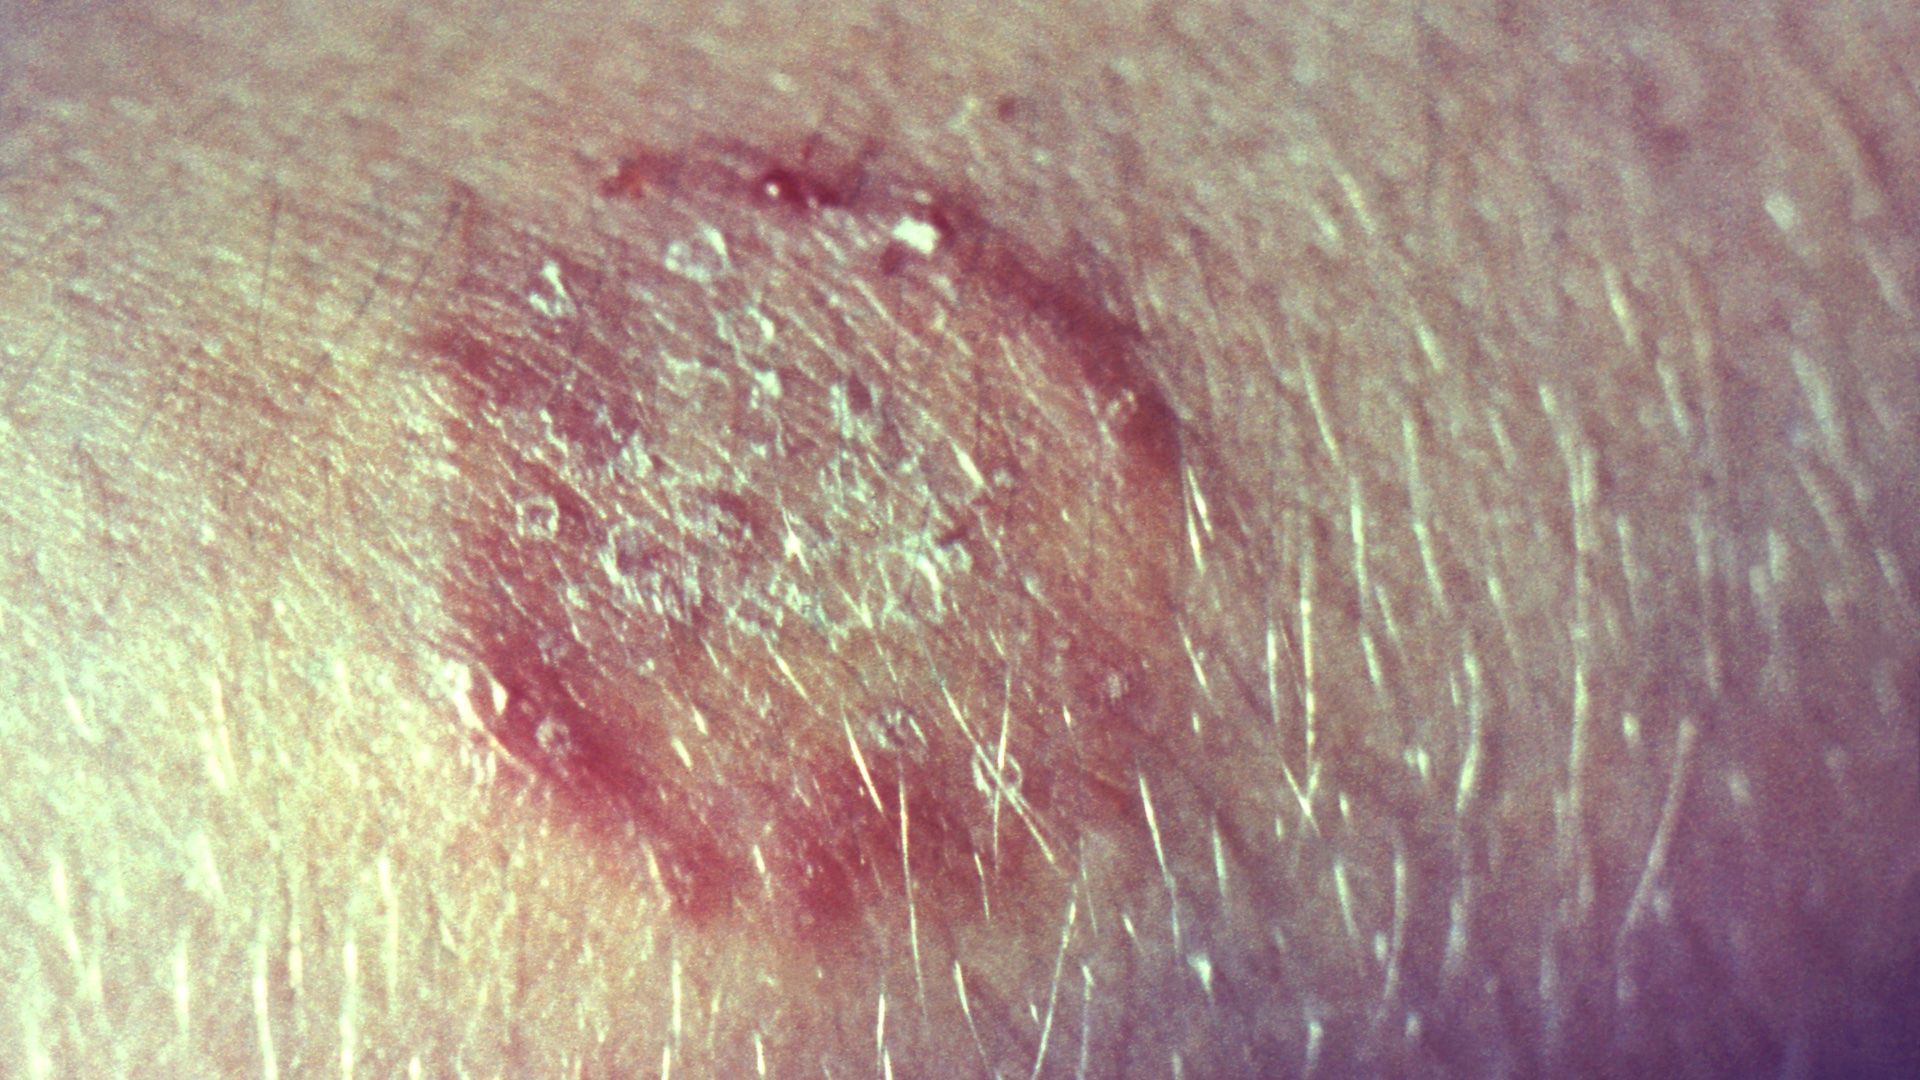 Close up of a ring-shaped sore on human skin